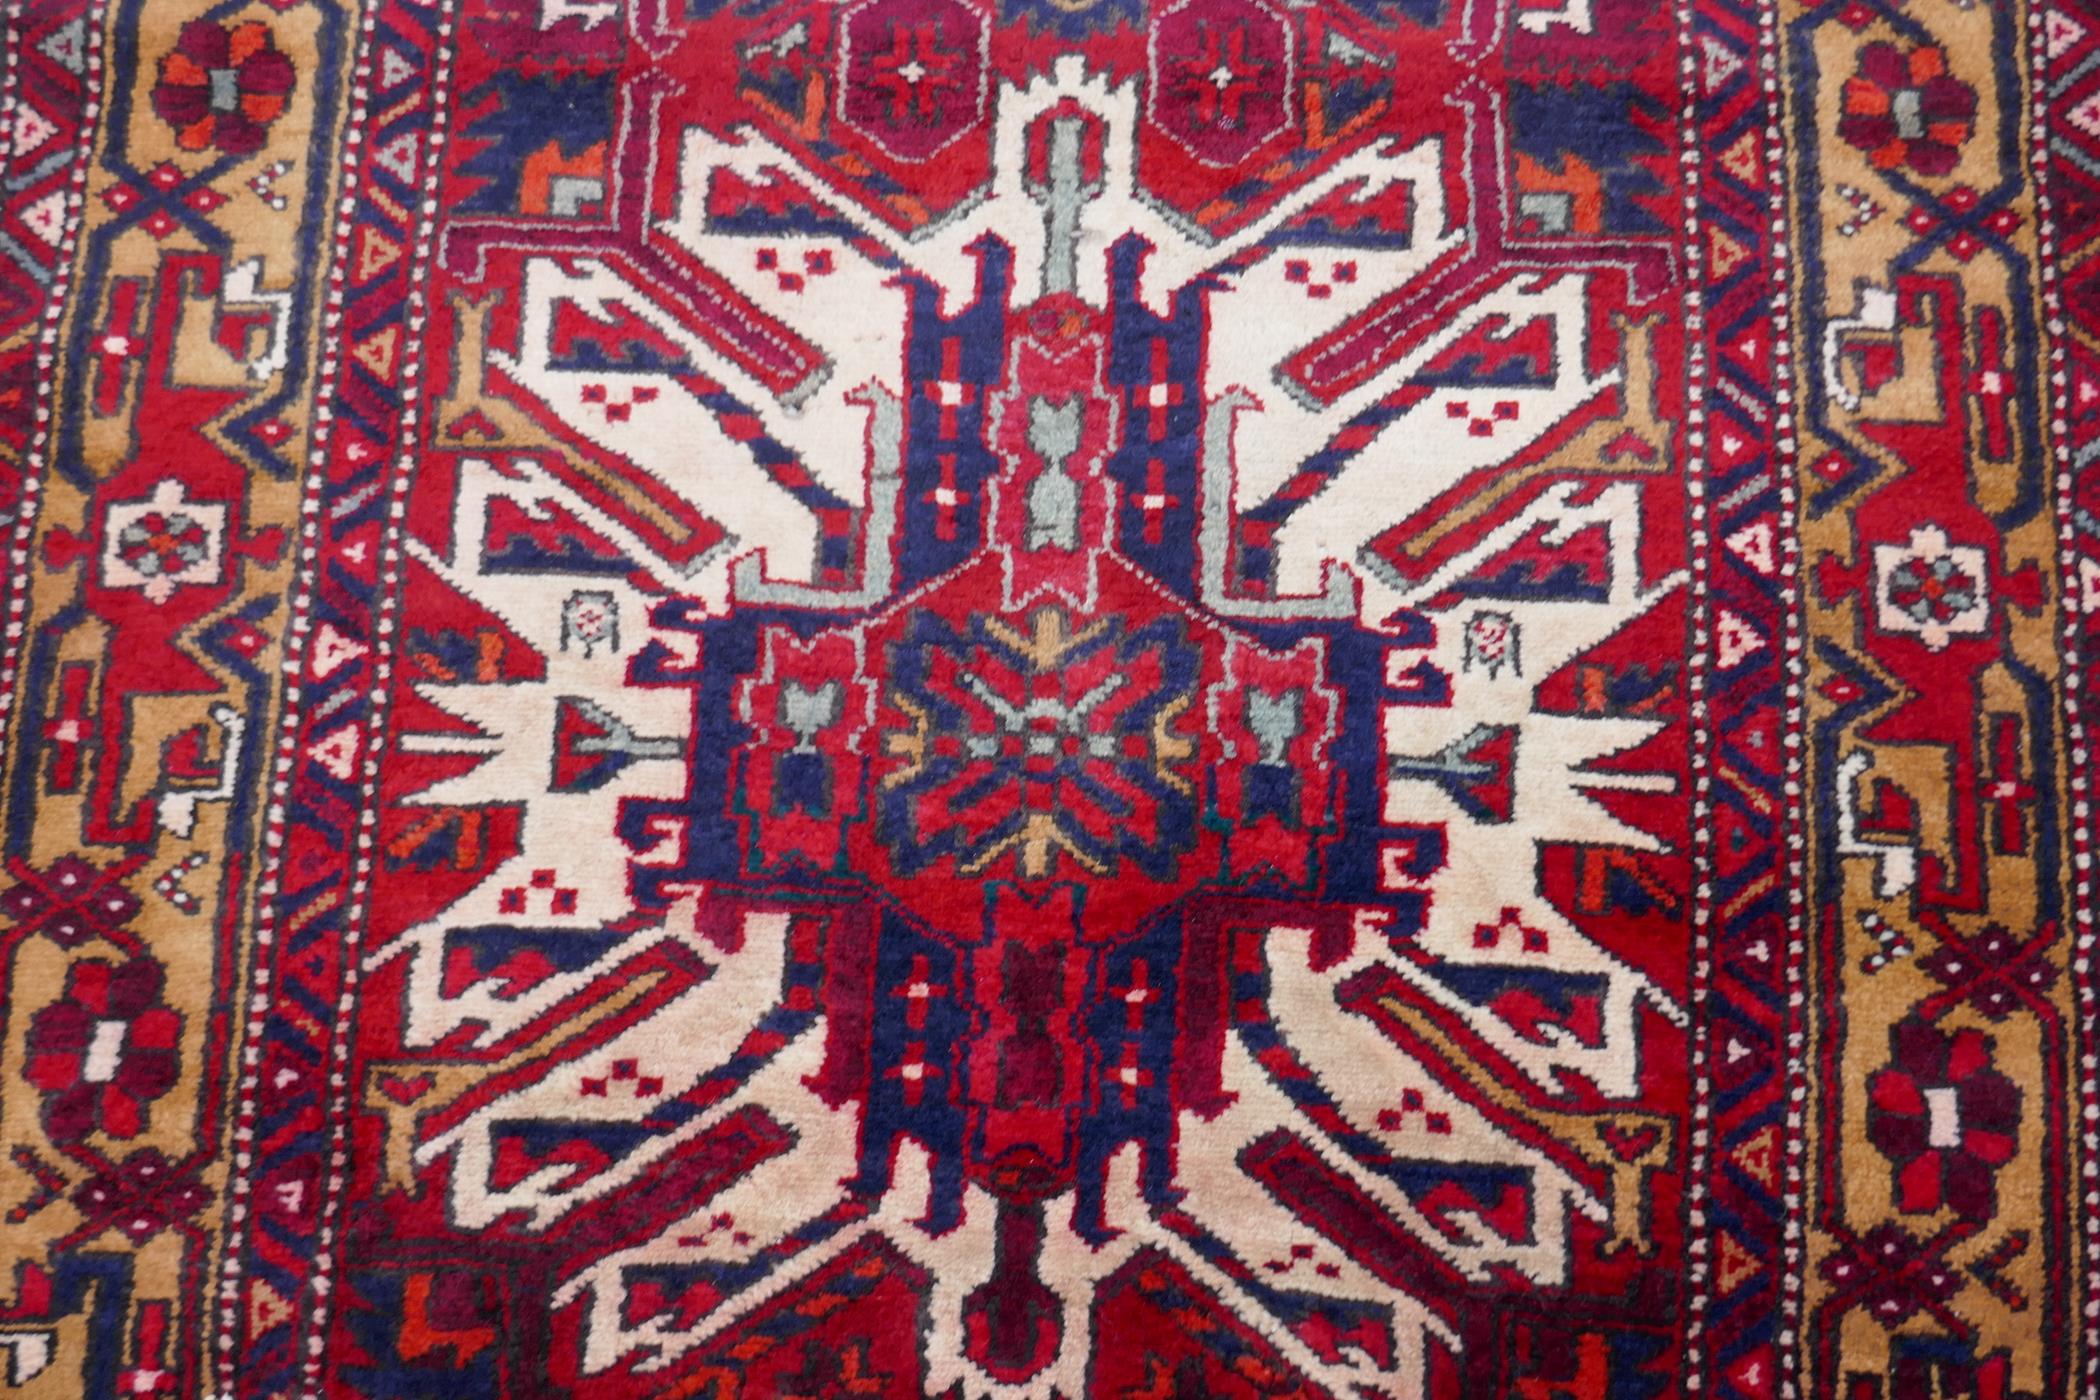 A Persian red ground Heritz runner with a starburst medallion design, 46" x 131" - Image 4 of 8